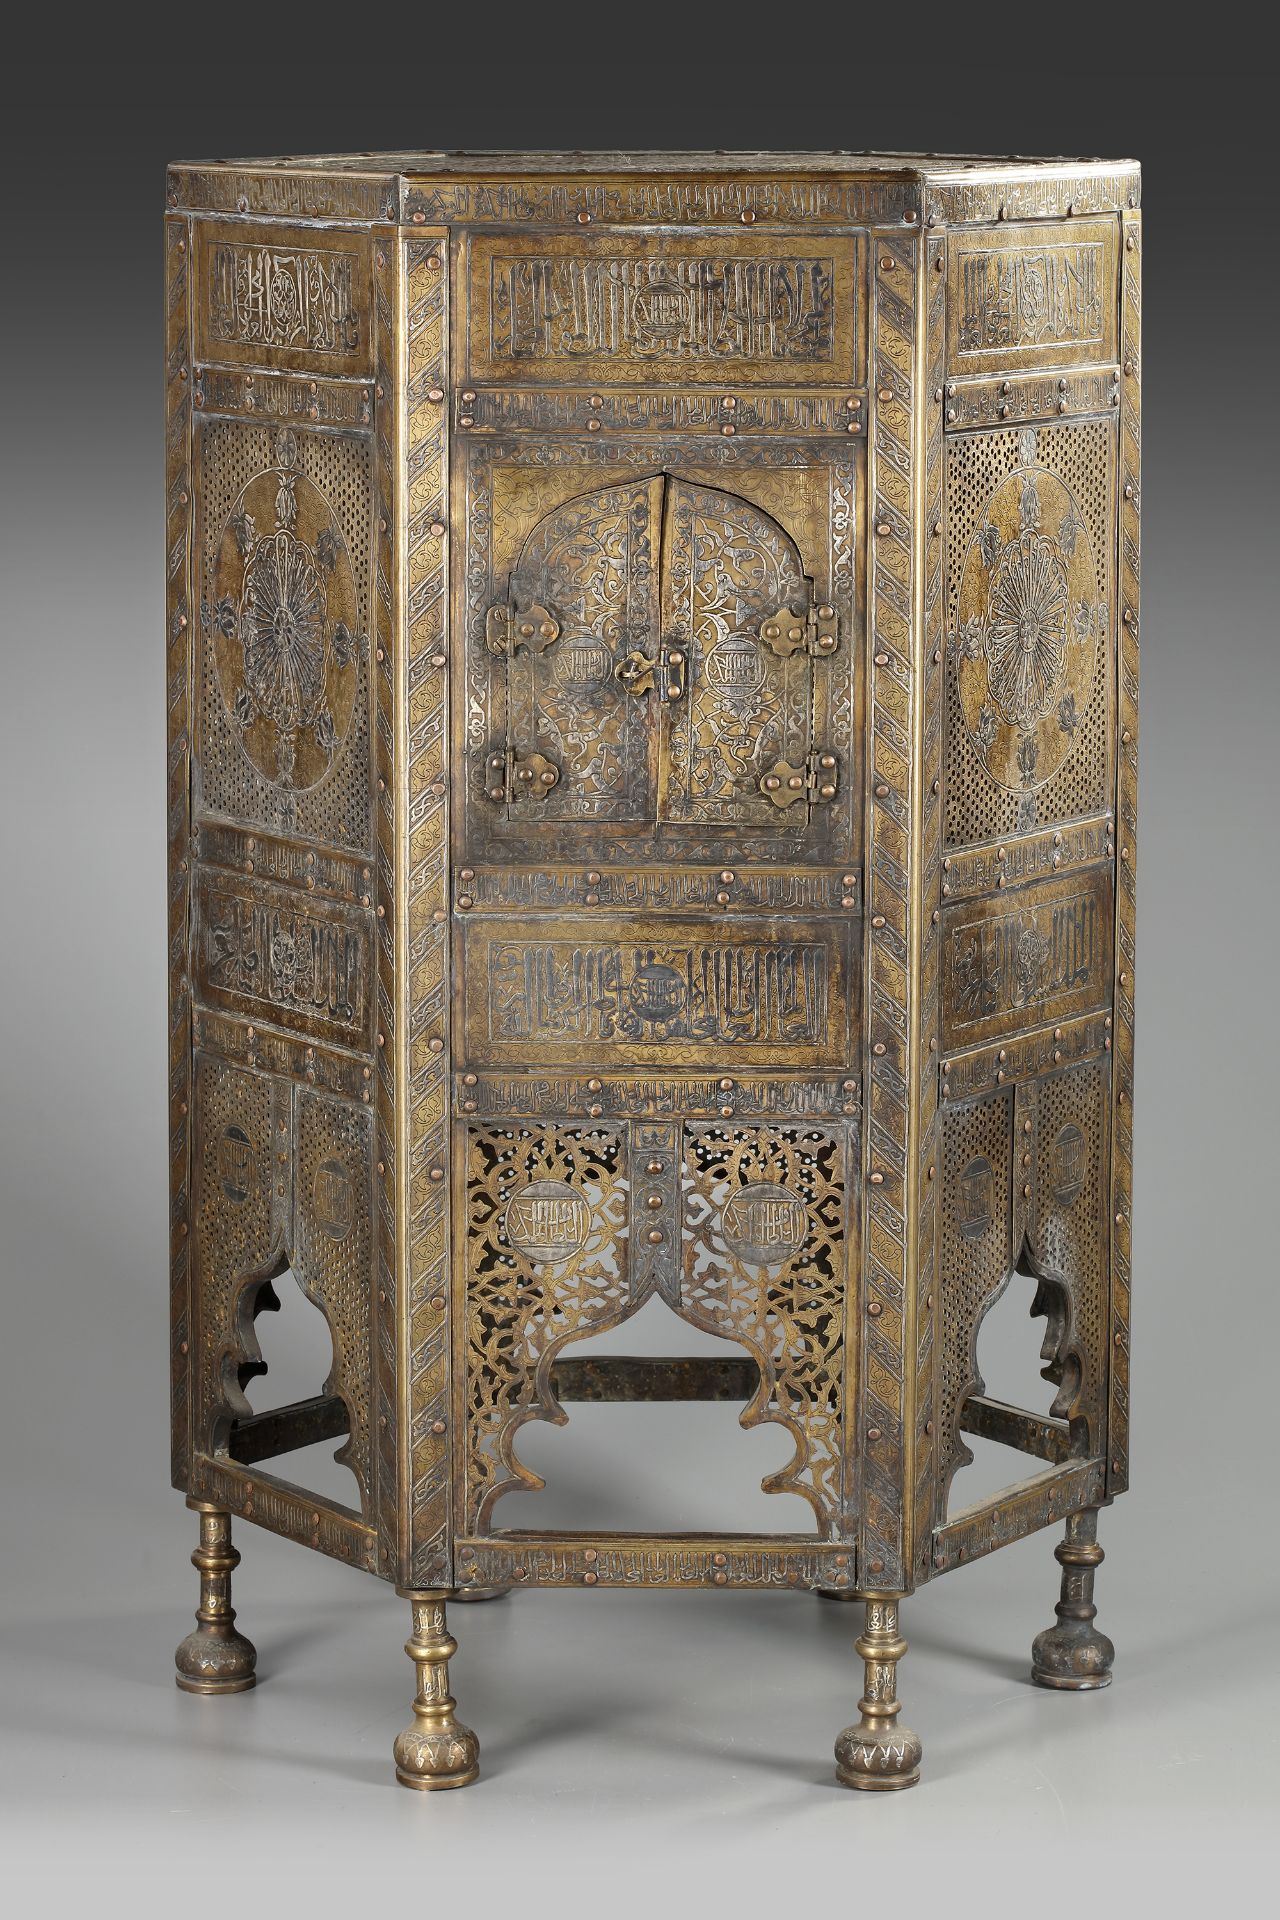 A LARGE CAIROWARE GOLD, SILVER AND COPPER INLAID BRASS KURSI, LATE 19TH CENTURY